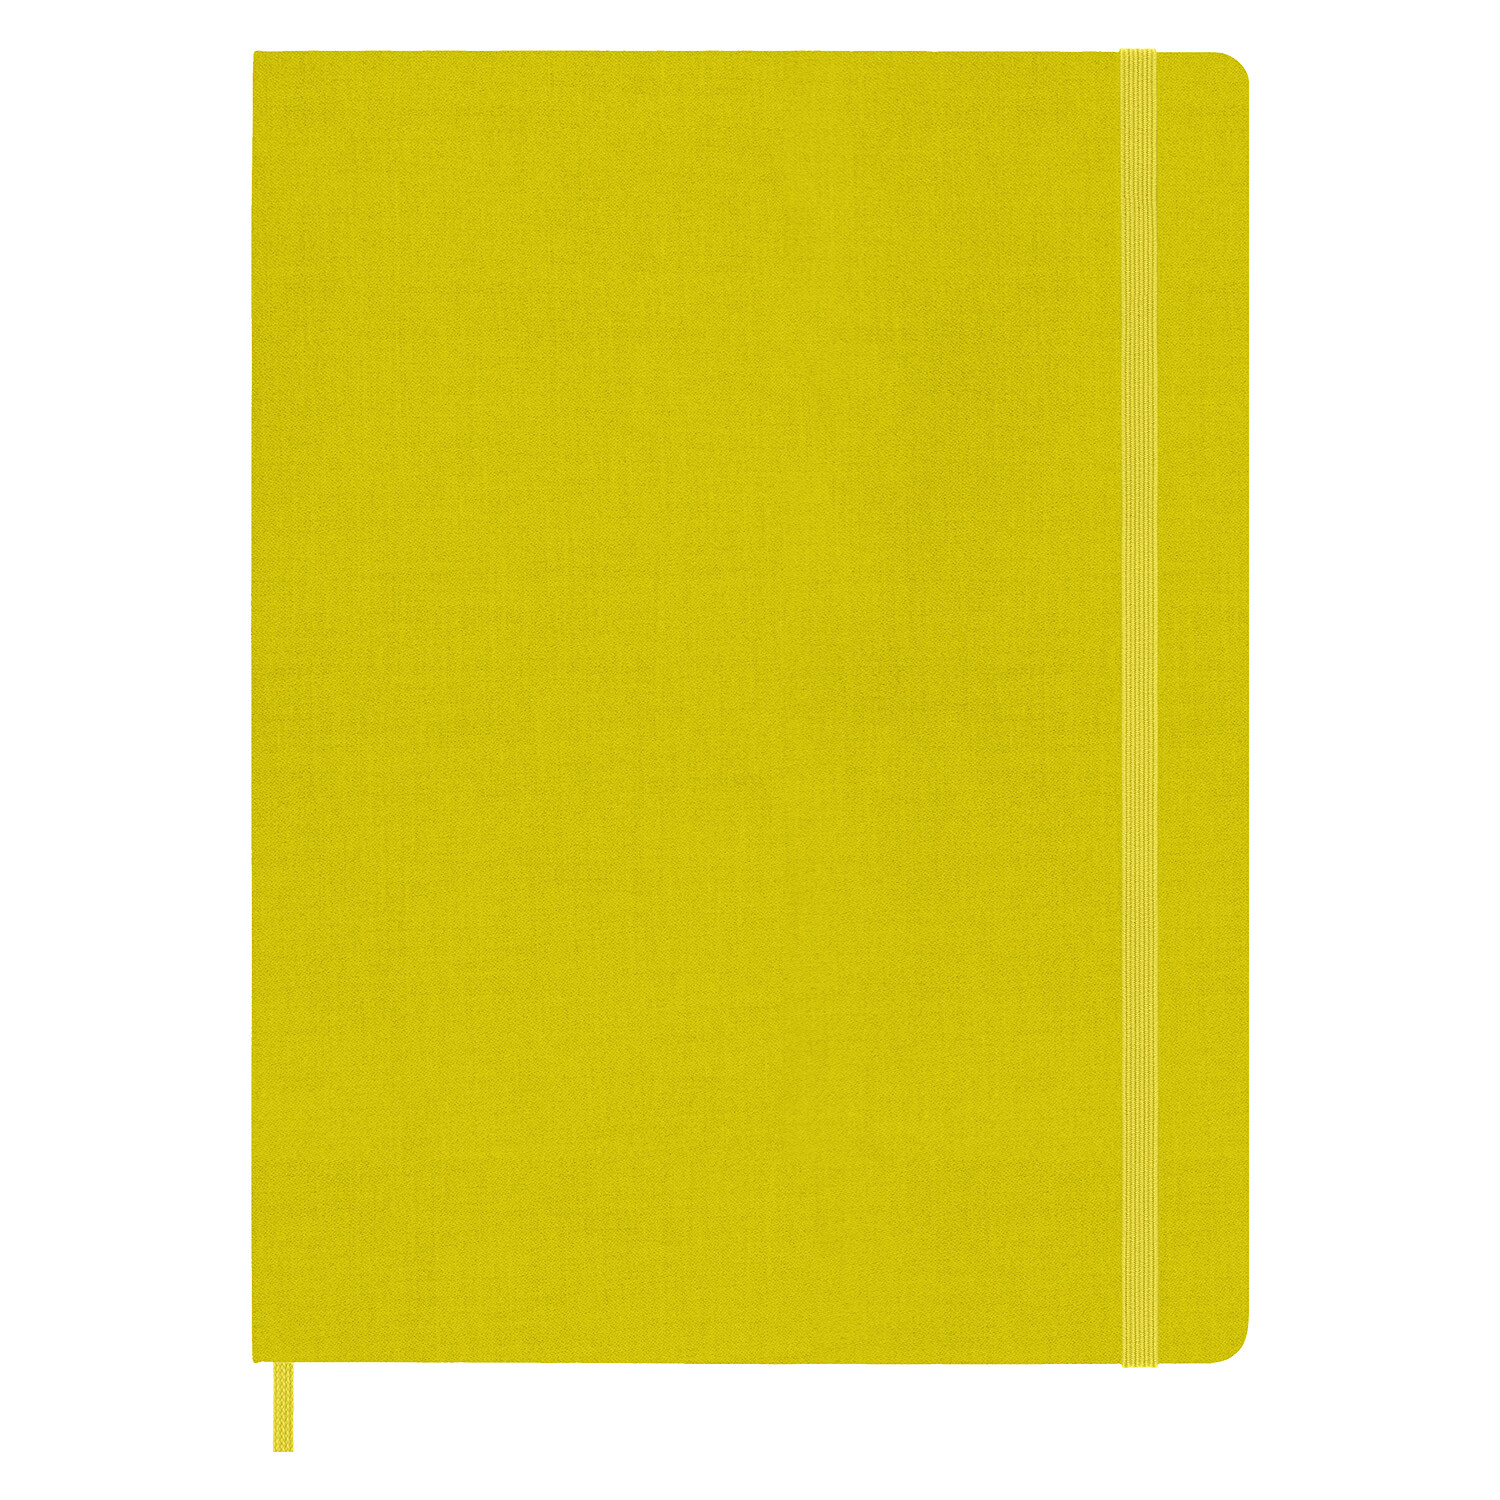 Moleskine Classic Notebook, Extra Large, Ruled, Hay Yellow, Silk Hard Cover (7.5 X 10) (Hardcover)